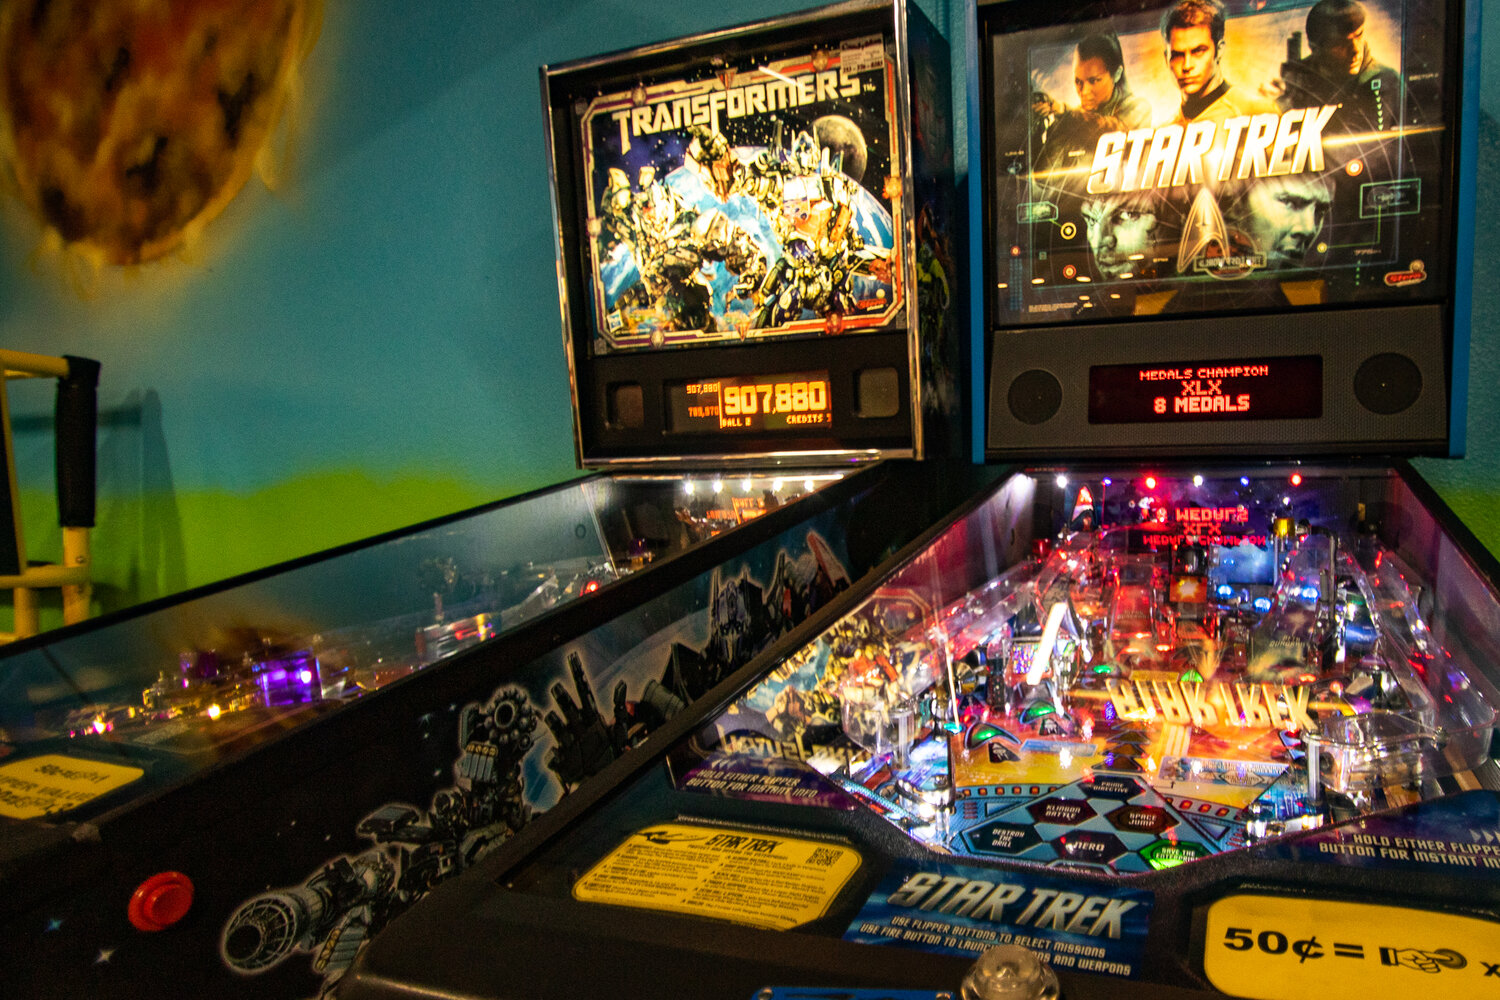 Pinball machines light up on Thursday, Aug. 31 at the newly reopened Shankz Black Light Miniature Golf location in Chehalis.